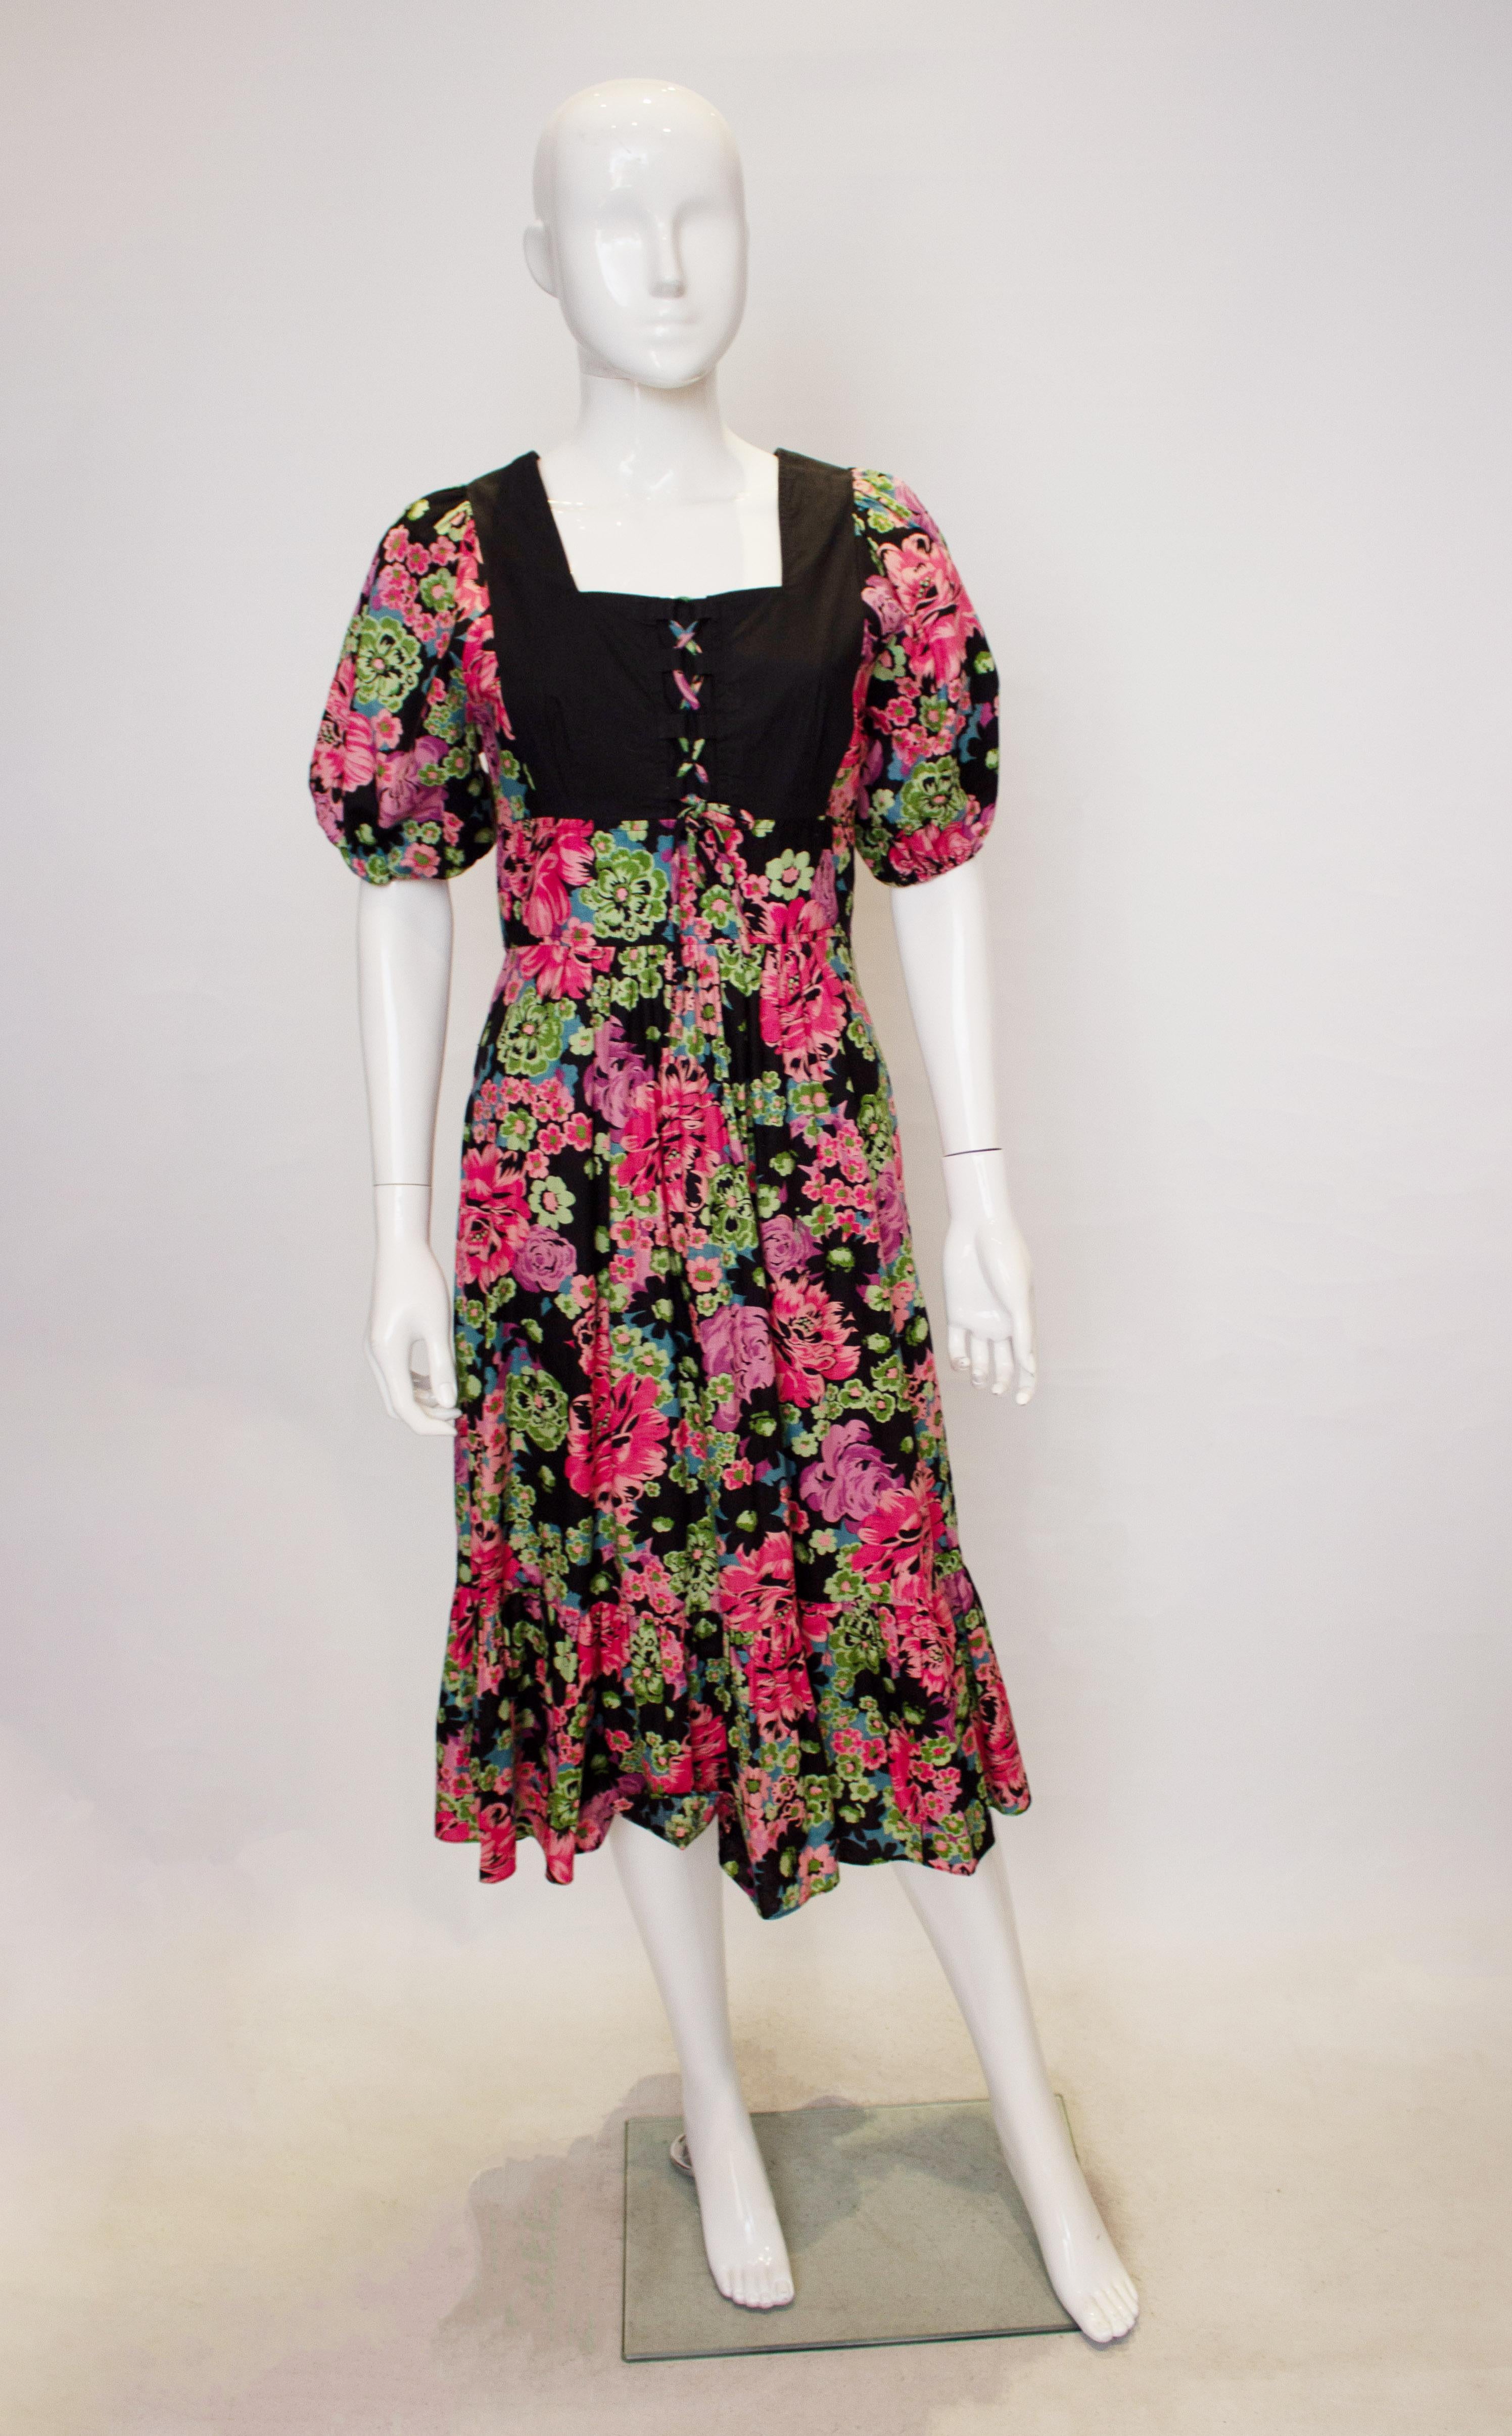 A great vintage dress for Summer by Susie G. The dress has a square neckline and backline, with slightly puff sleaves. It has a central back opening, frill at the hem and tie detail at the bodice.